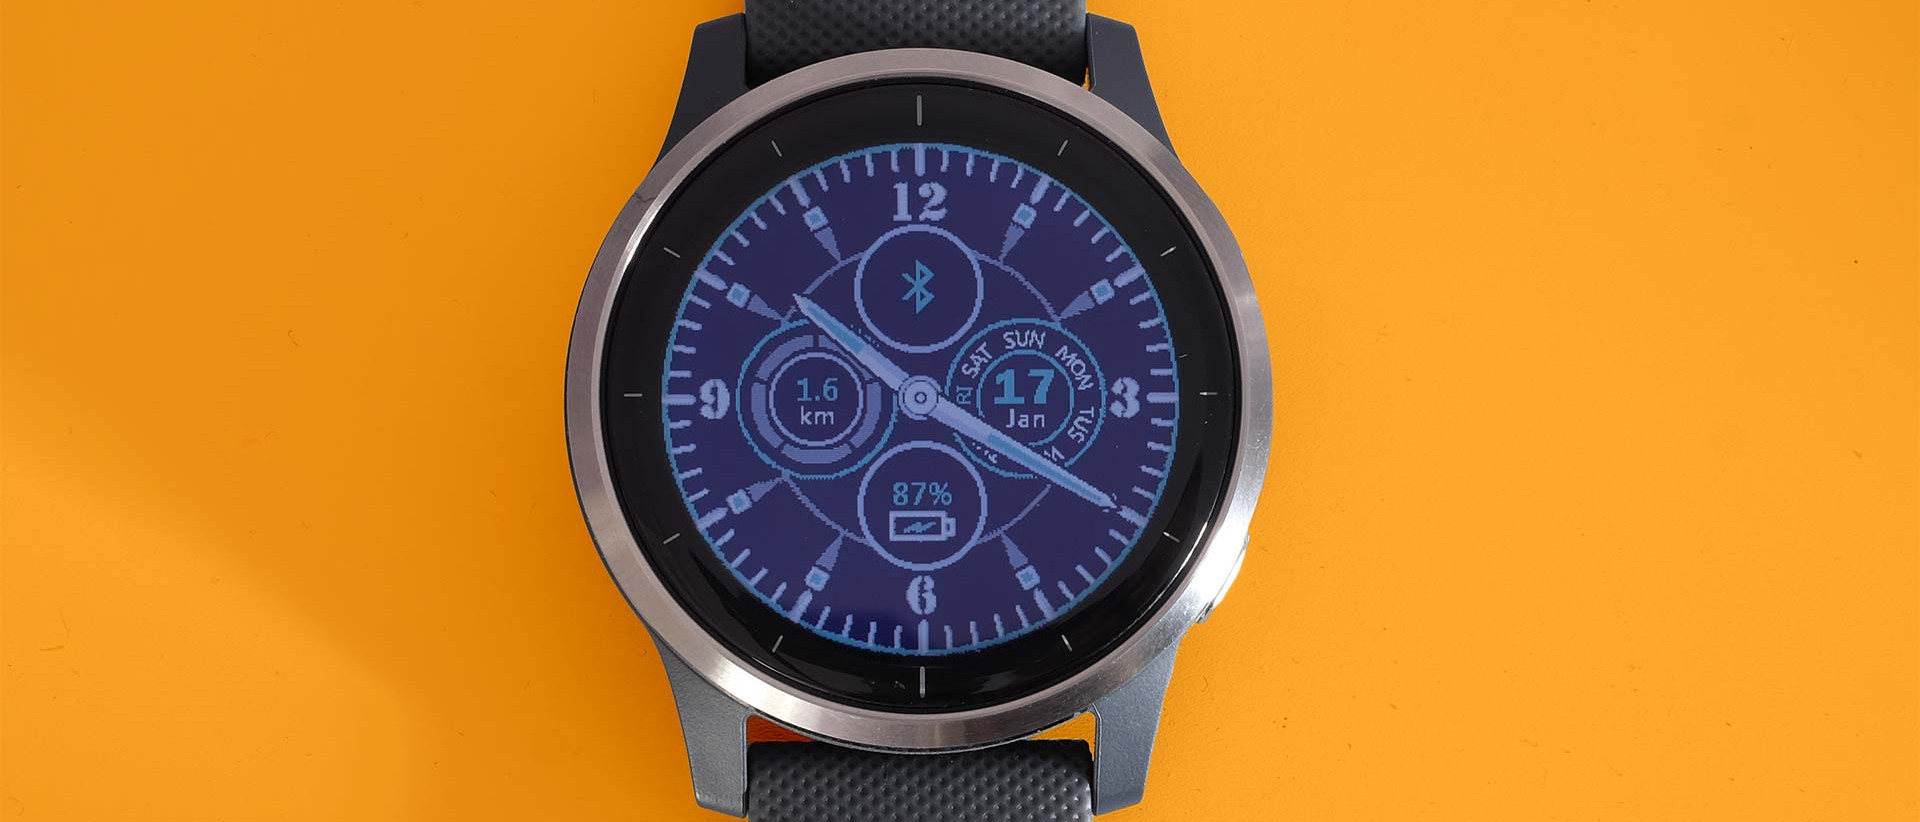 Garmin Vivoactive 4/4S review: Another outstanding sports smartwatch